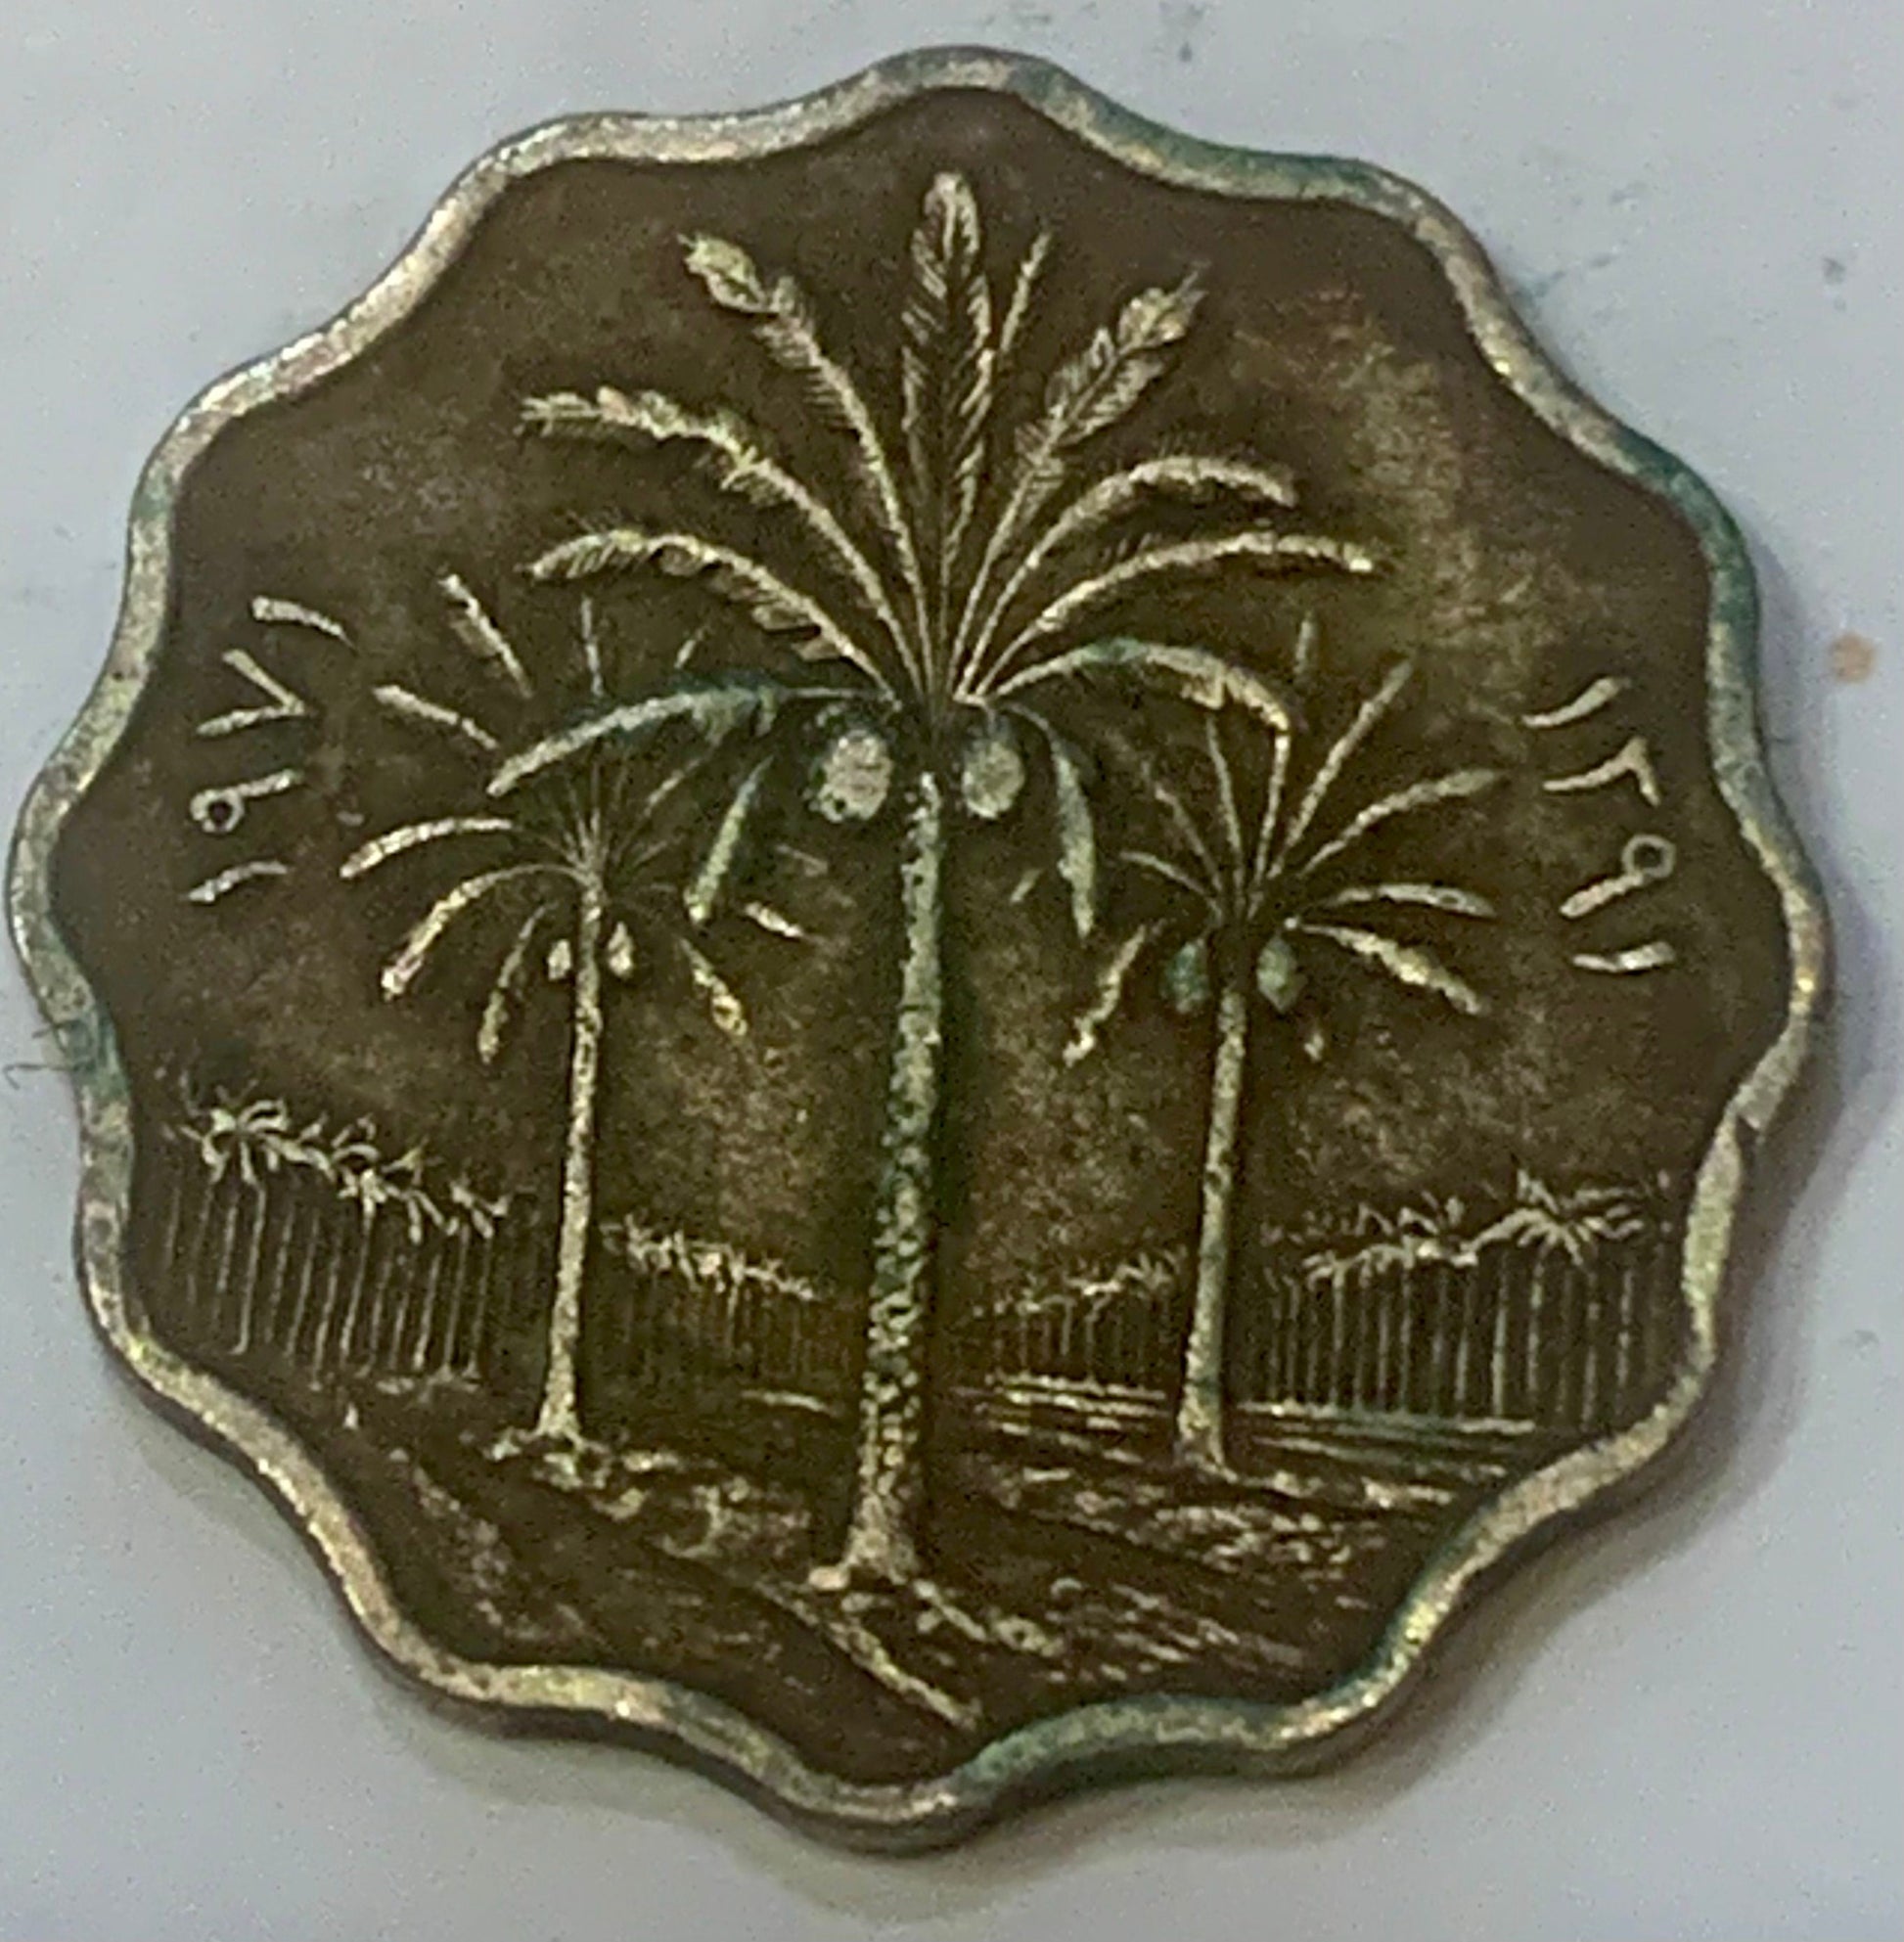 Own a Tangible Link to Iraqi Heritage: Iraq 50 Fils, 1970 Treasure & GIFT